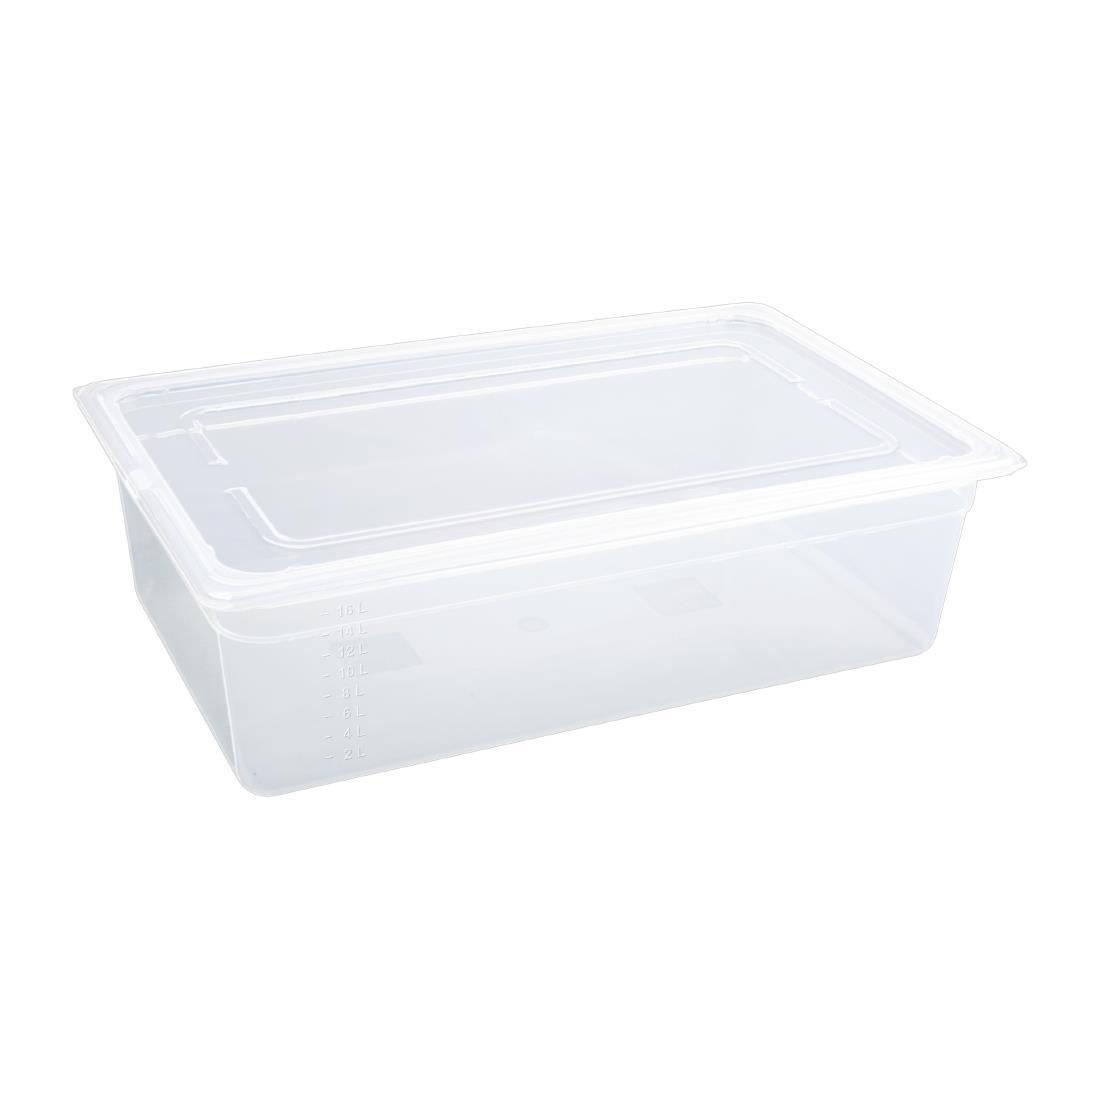 Vogue Polypropylene 1/1 Gastronorm Container with Lid 150mm (Pack of 2) - GJ512  - 2